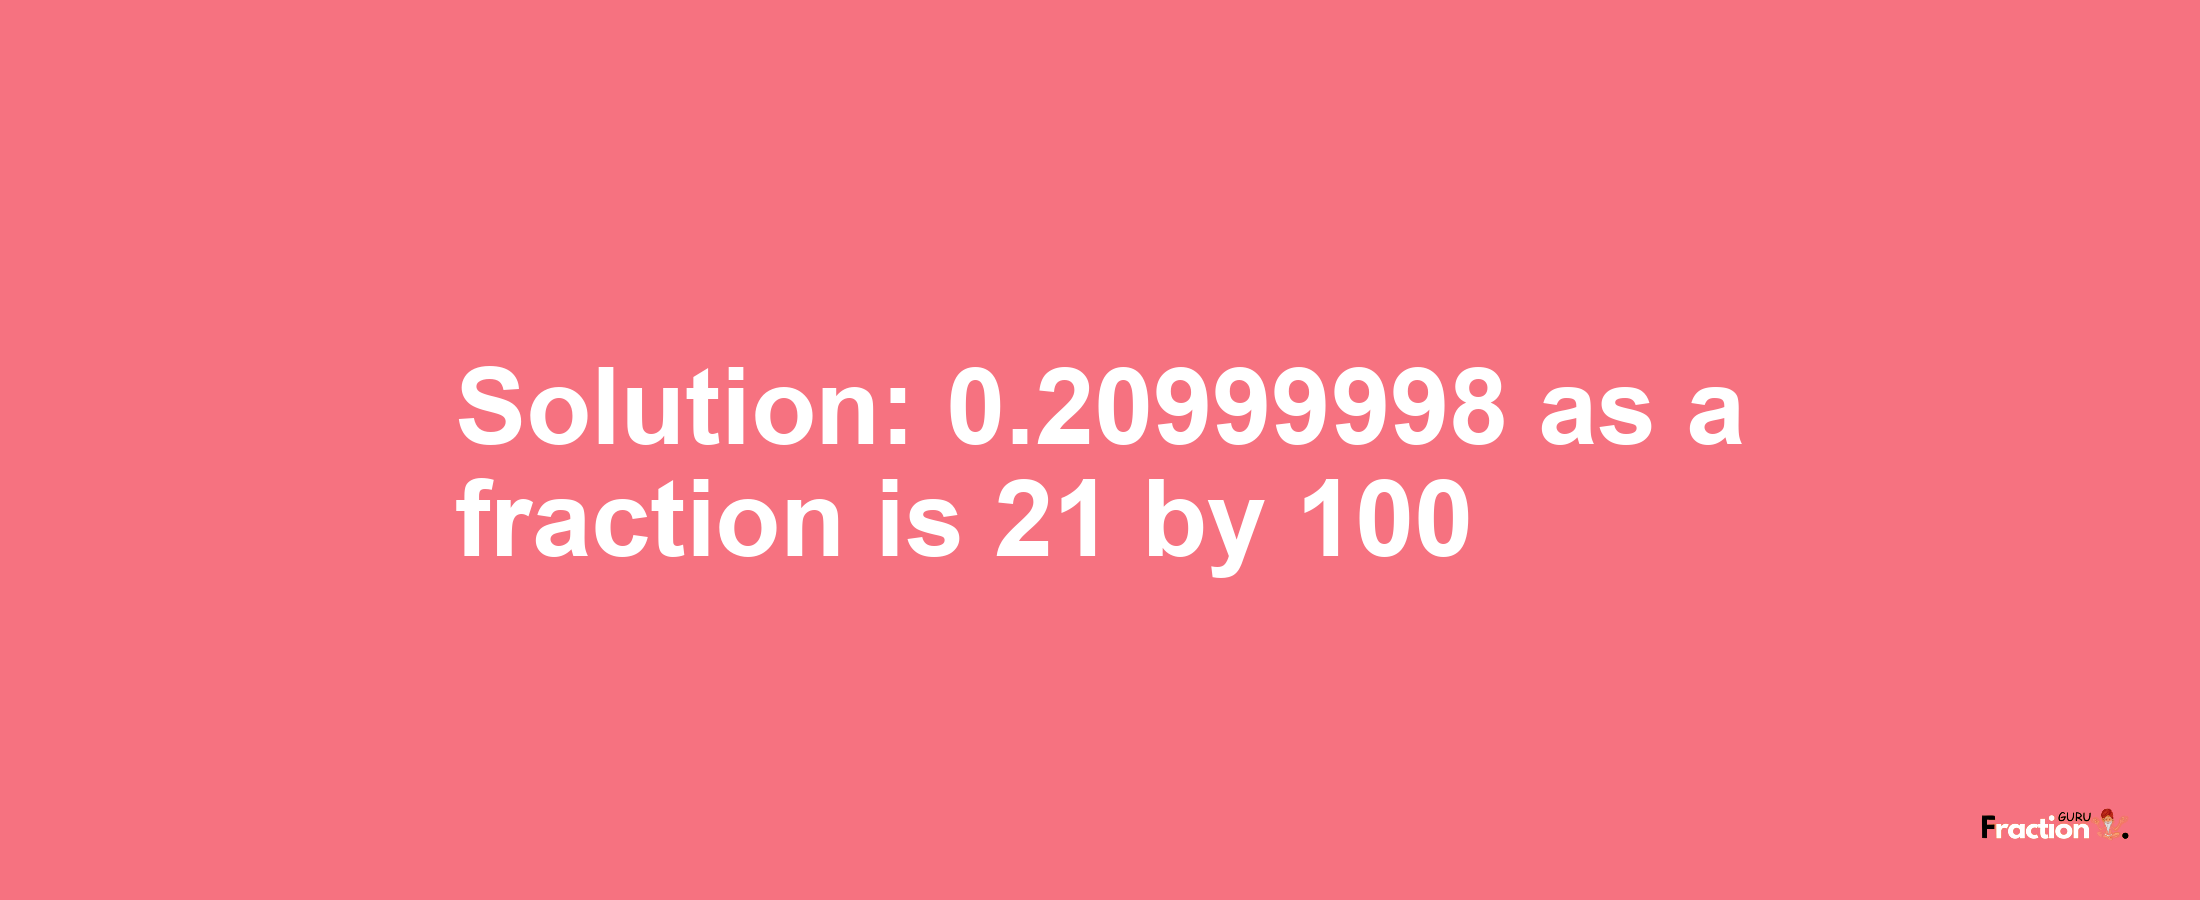 Solution:0.20999998 as a fraction is 21/100